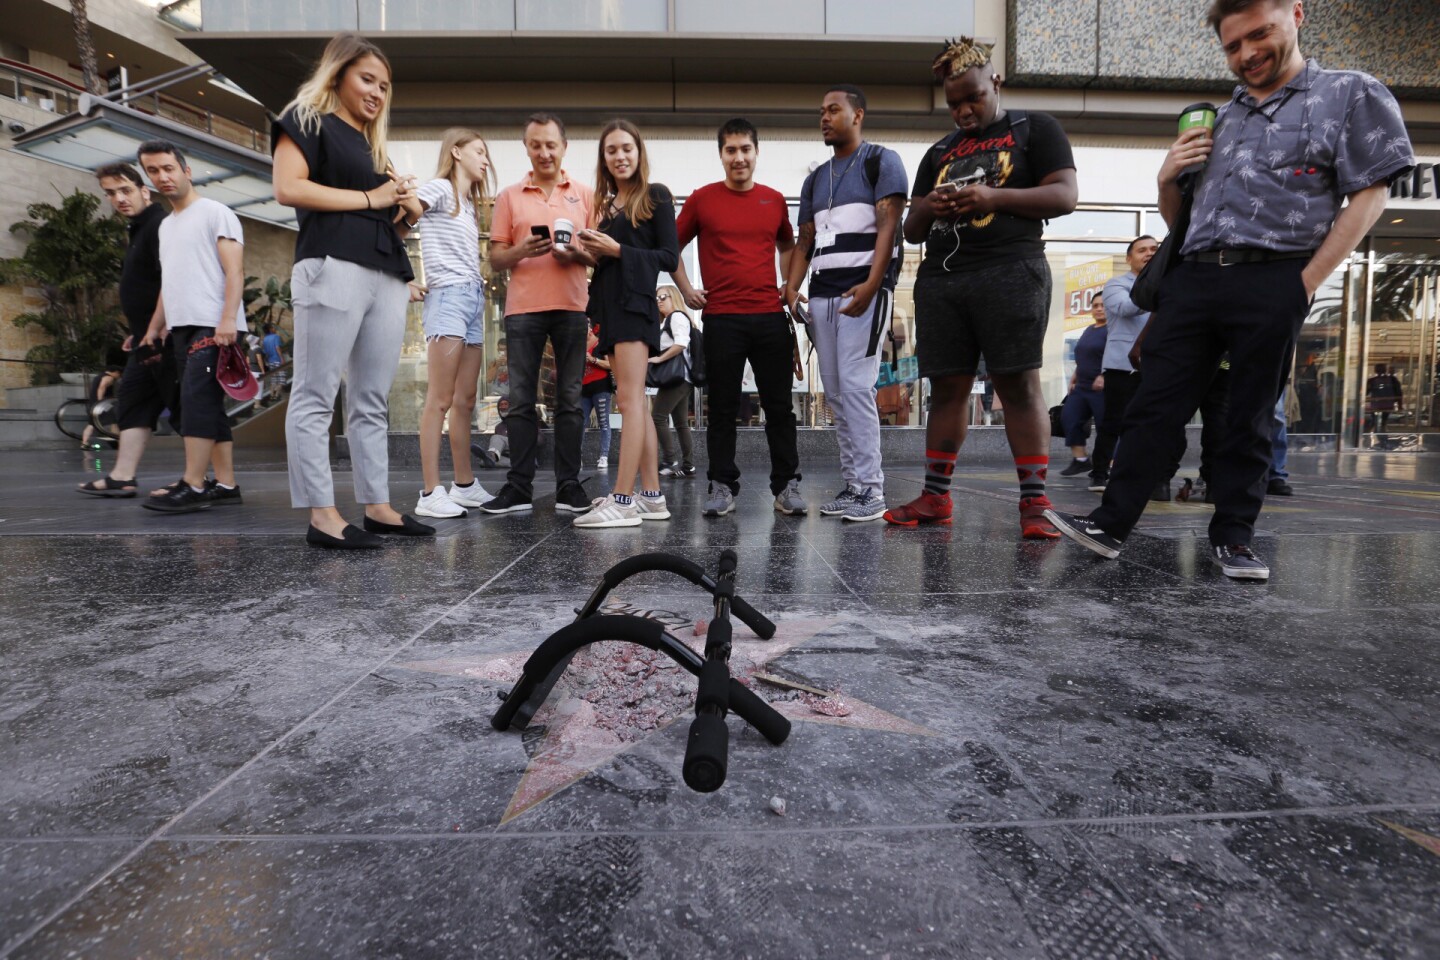 Pedestrians view the spot where Donald Trump's star had been on the Hollywood Walk of Fame before it was vandalized on July 25, 2018.